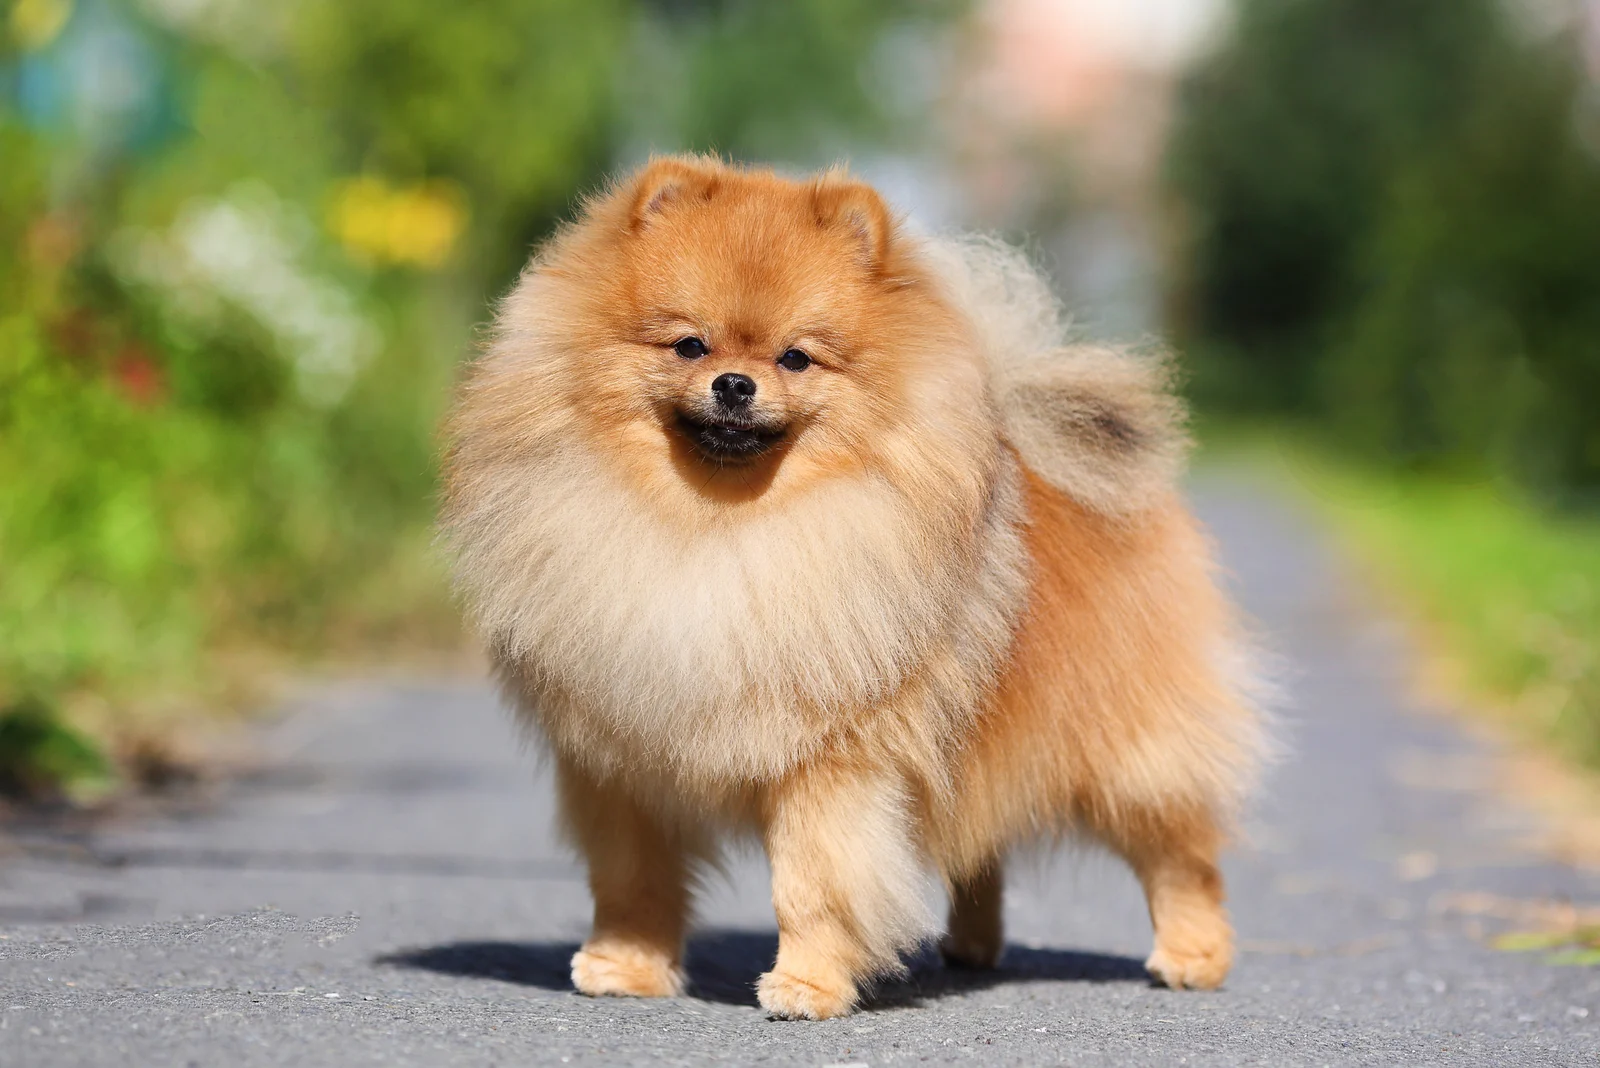 The Pomeranian puppy stands grassy on the street and looks around